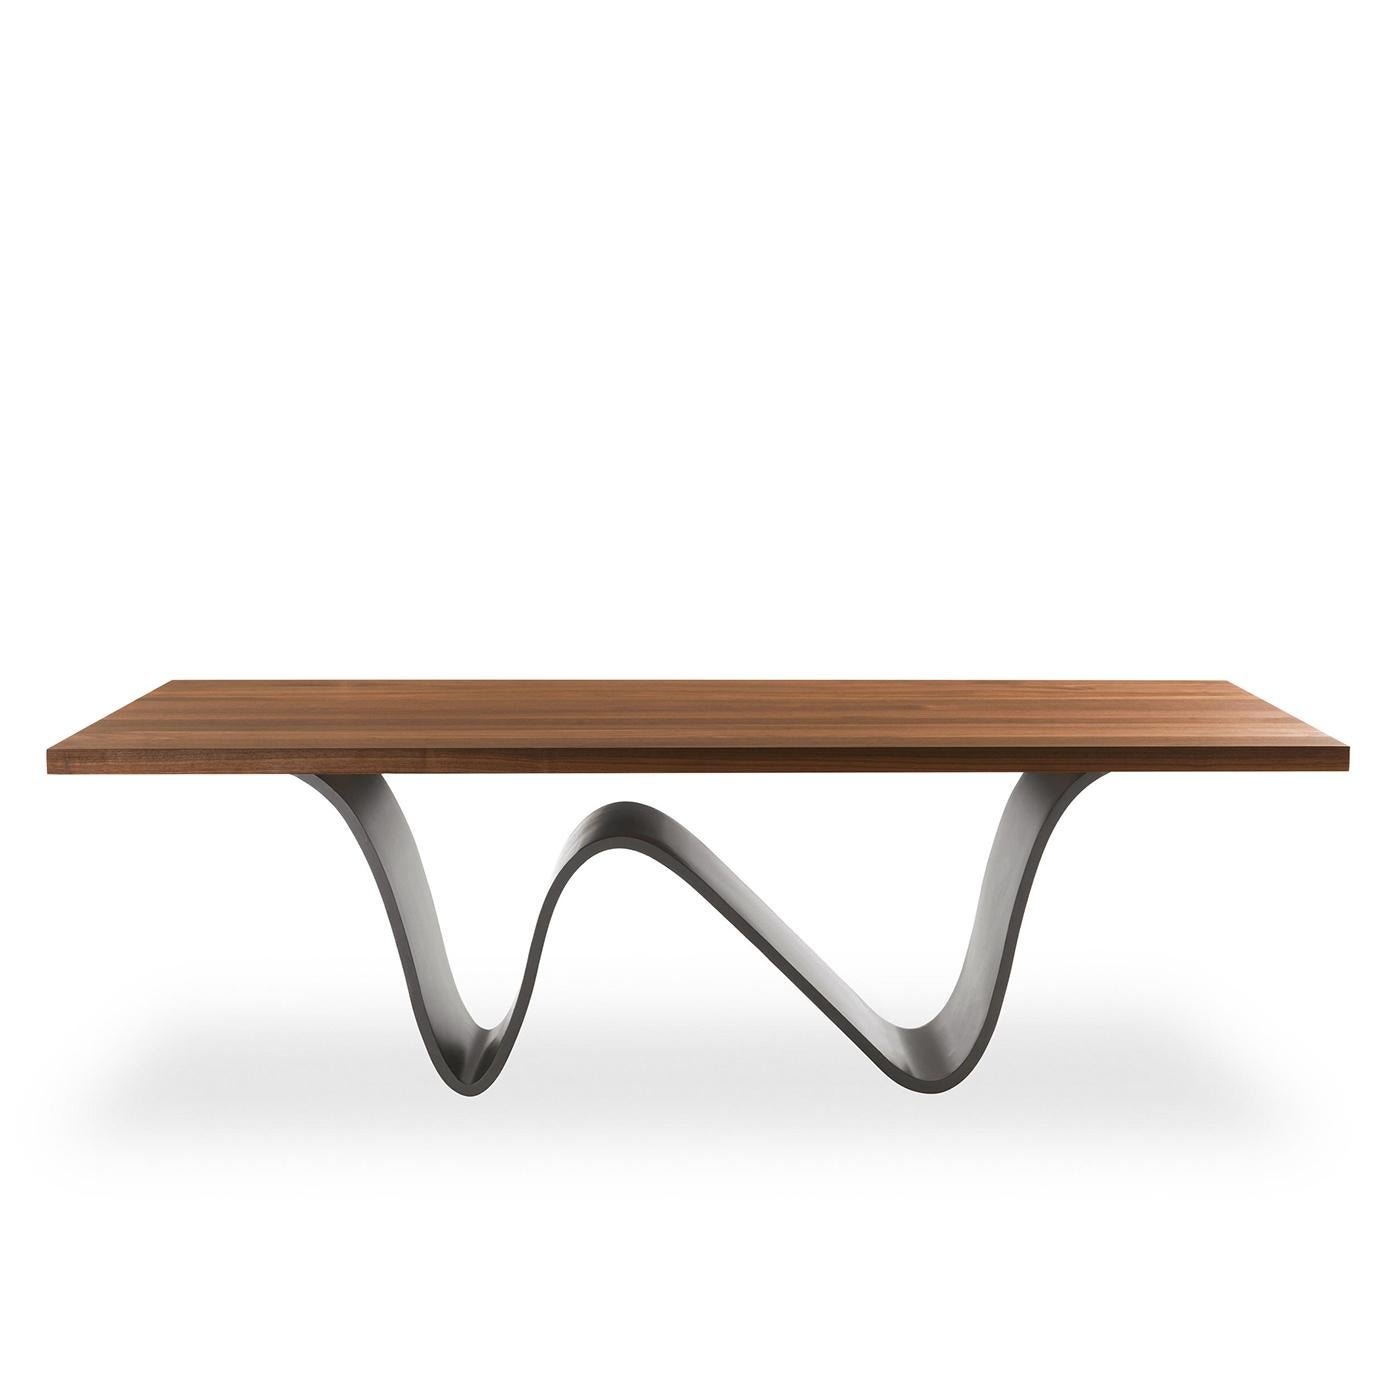 Dining table Ripling with solid walnut top with straight edges,
wood treated with natural pine extracts wax. Base in iron in
lacquered finish.
Also available on request with solid natural oak top.
Available on request in:
L240xD100xH76, price: